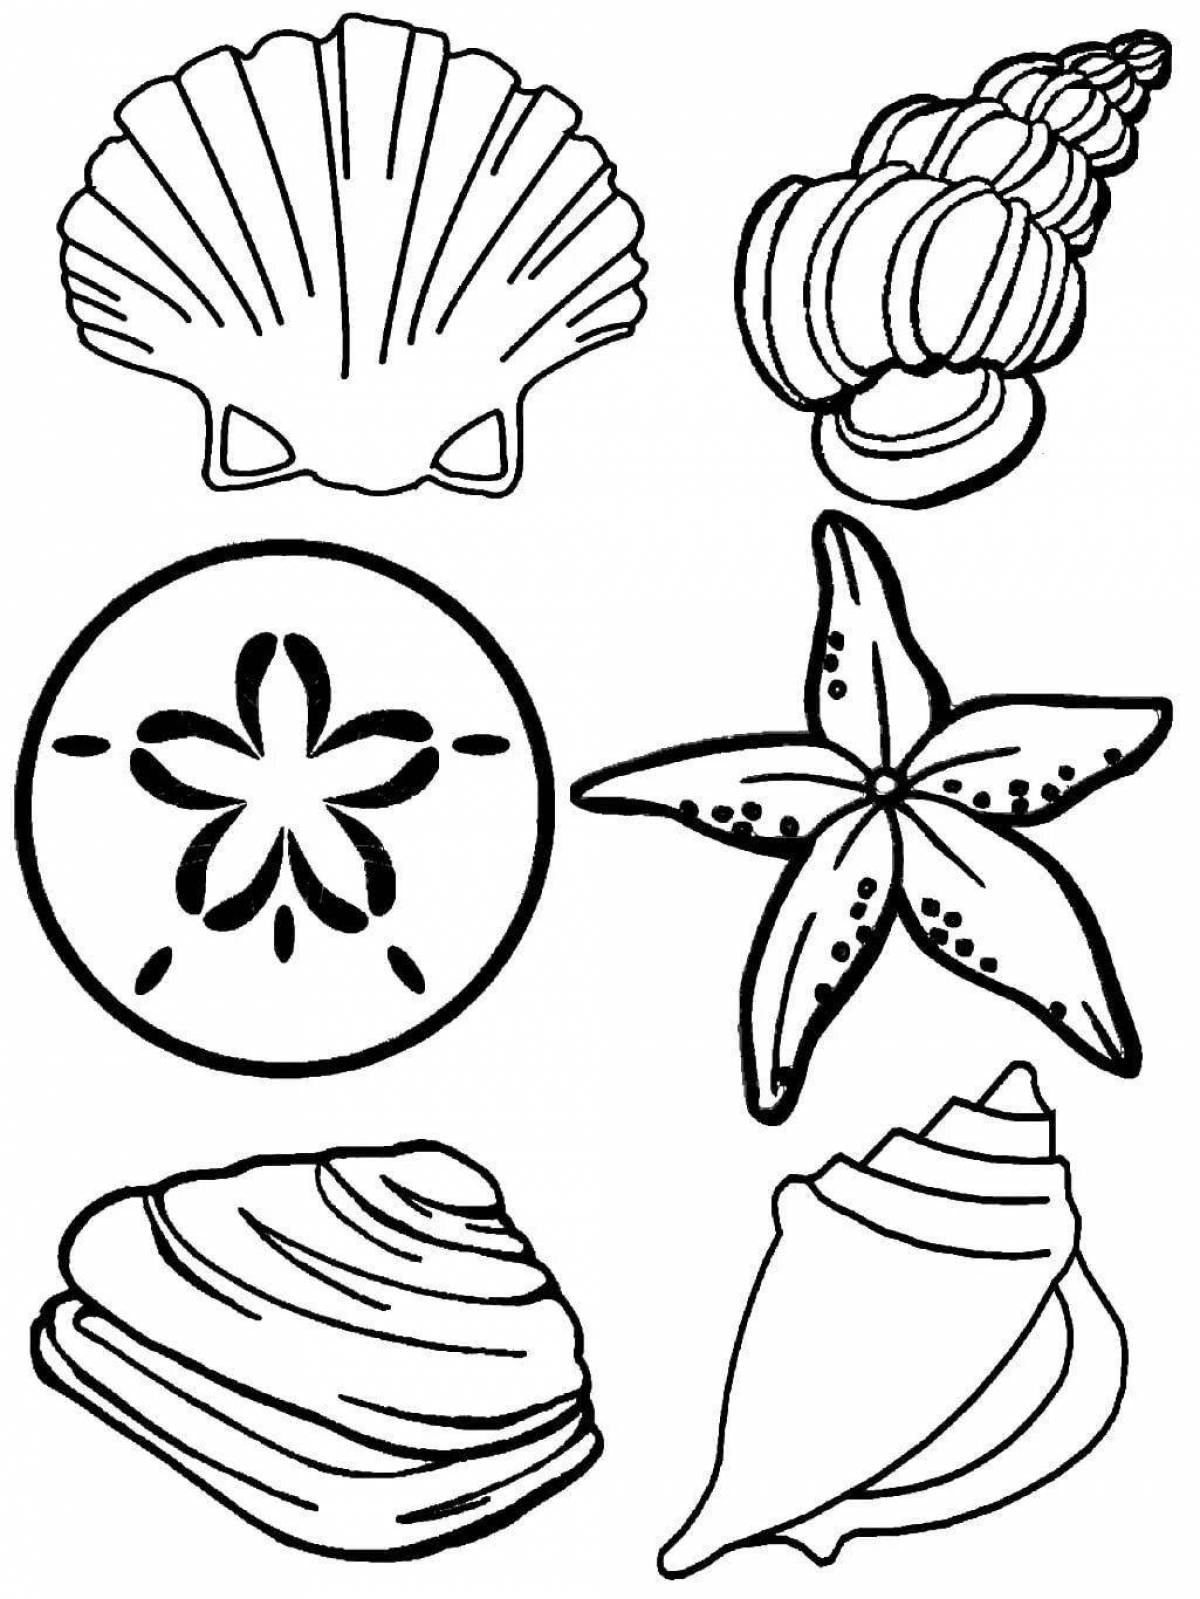 Cute shell coloring book for kids